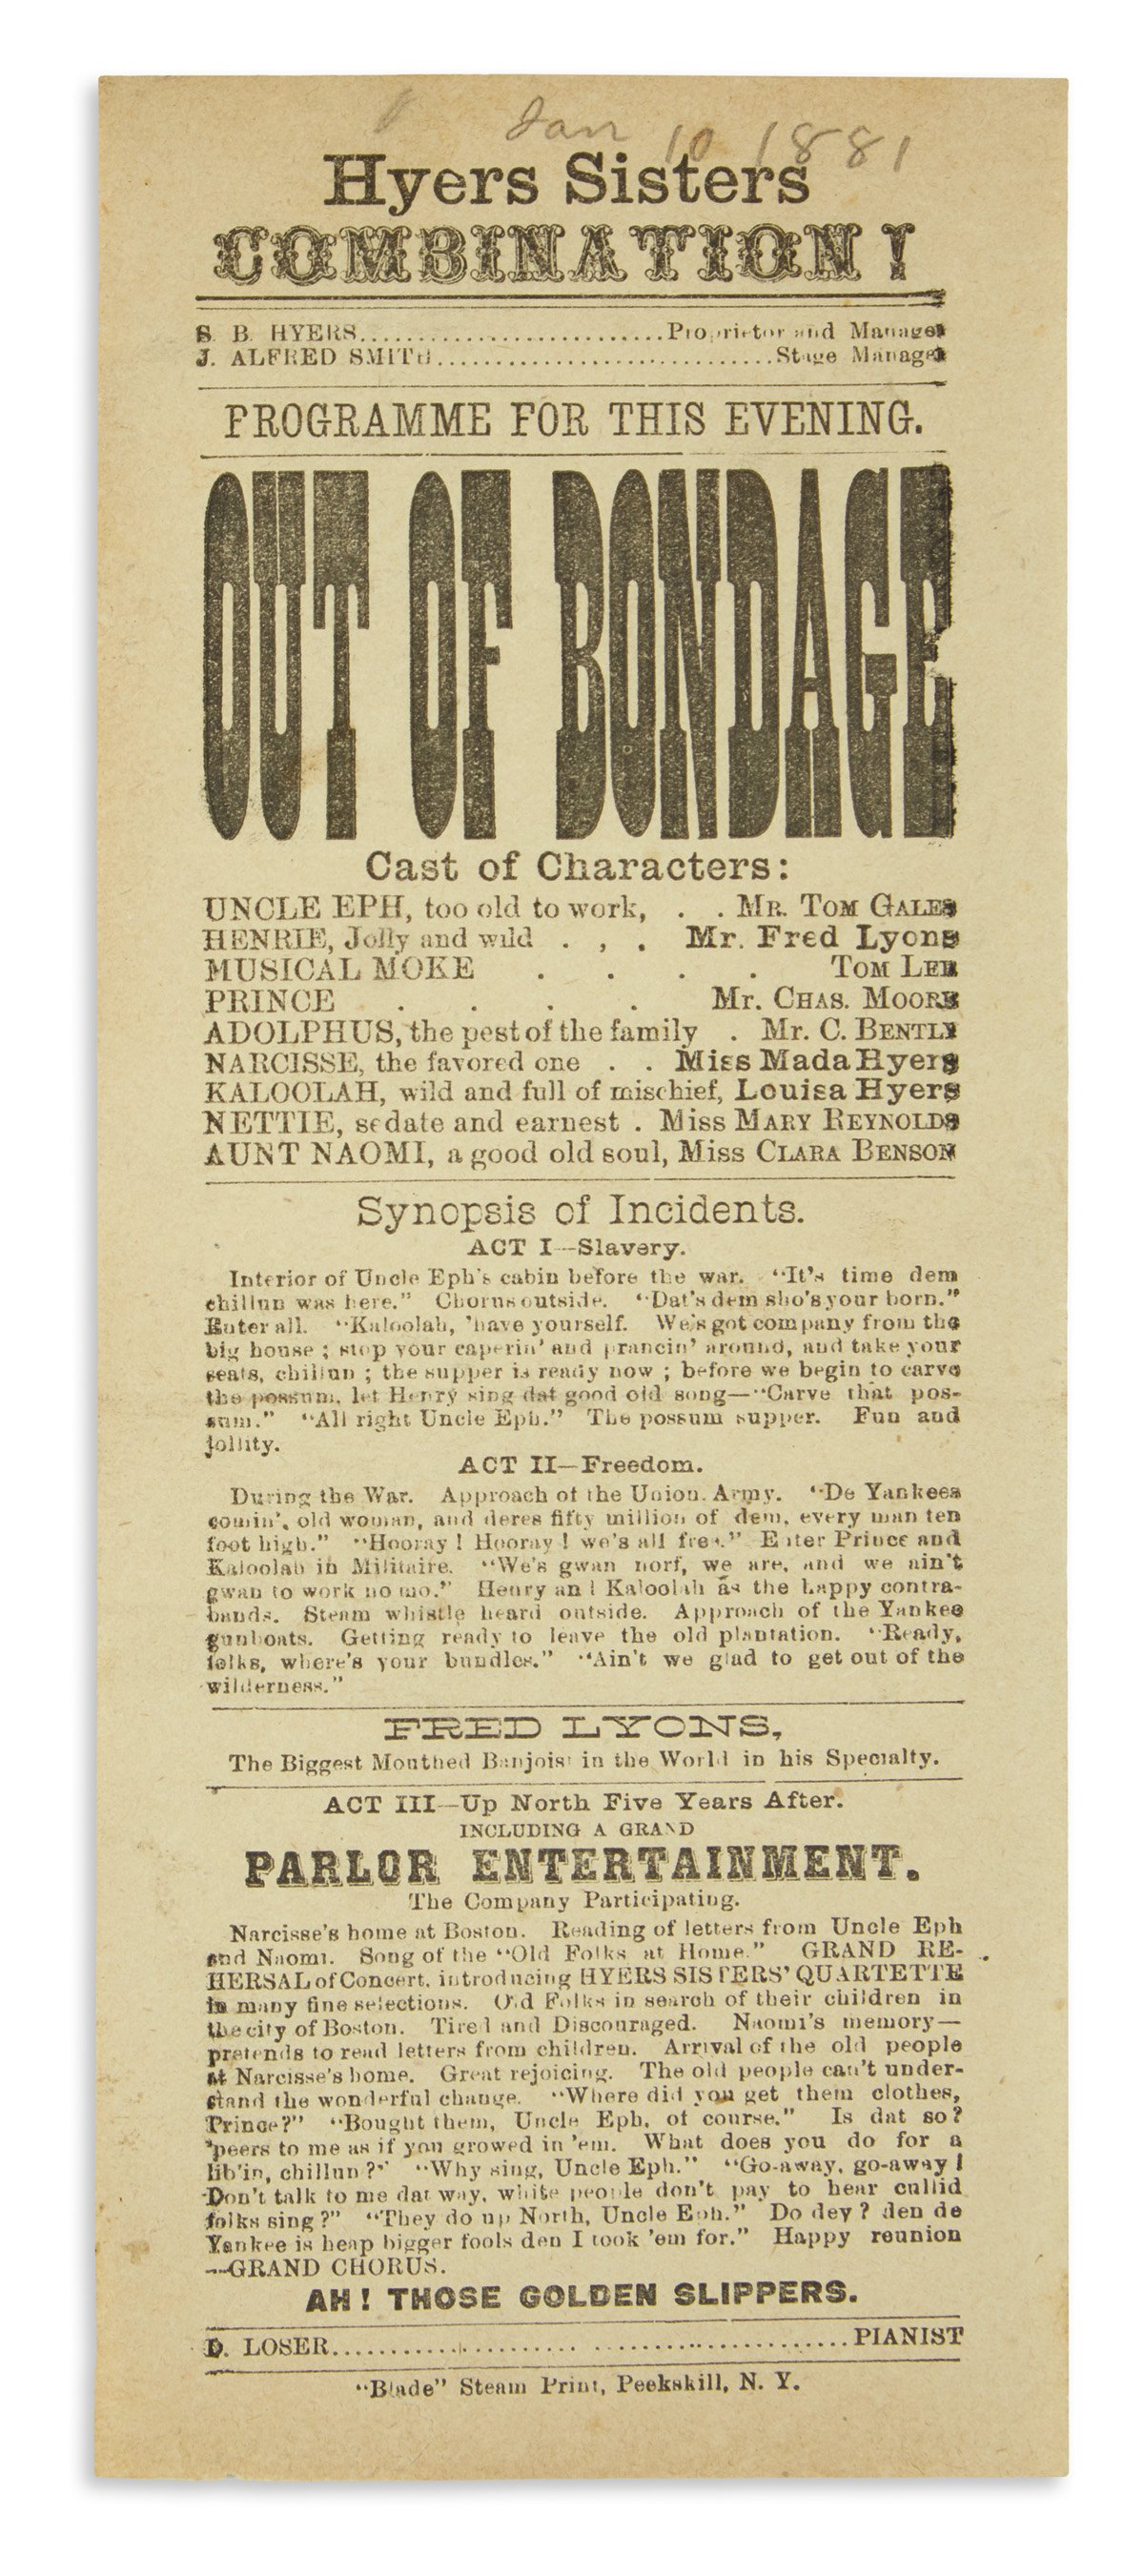 (ENTERTAINMENT--THEATER.) Program for the Hyers Sisters Combination in Out of Bondage.